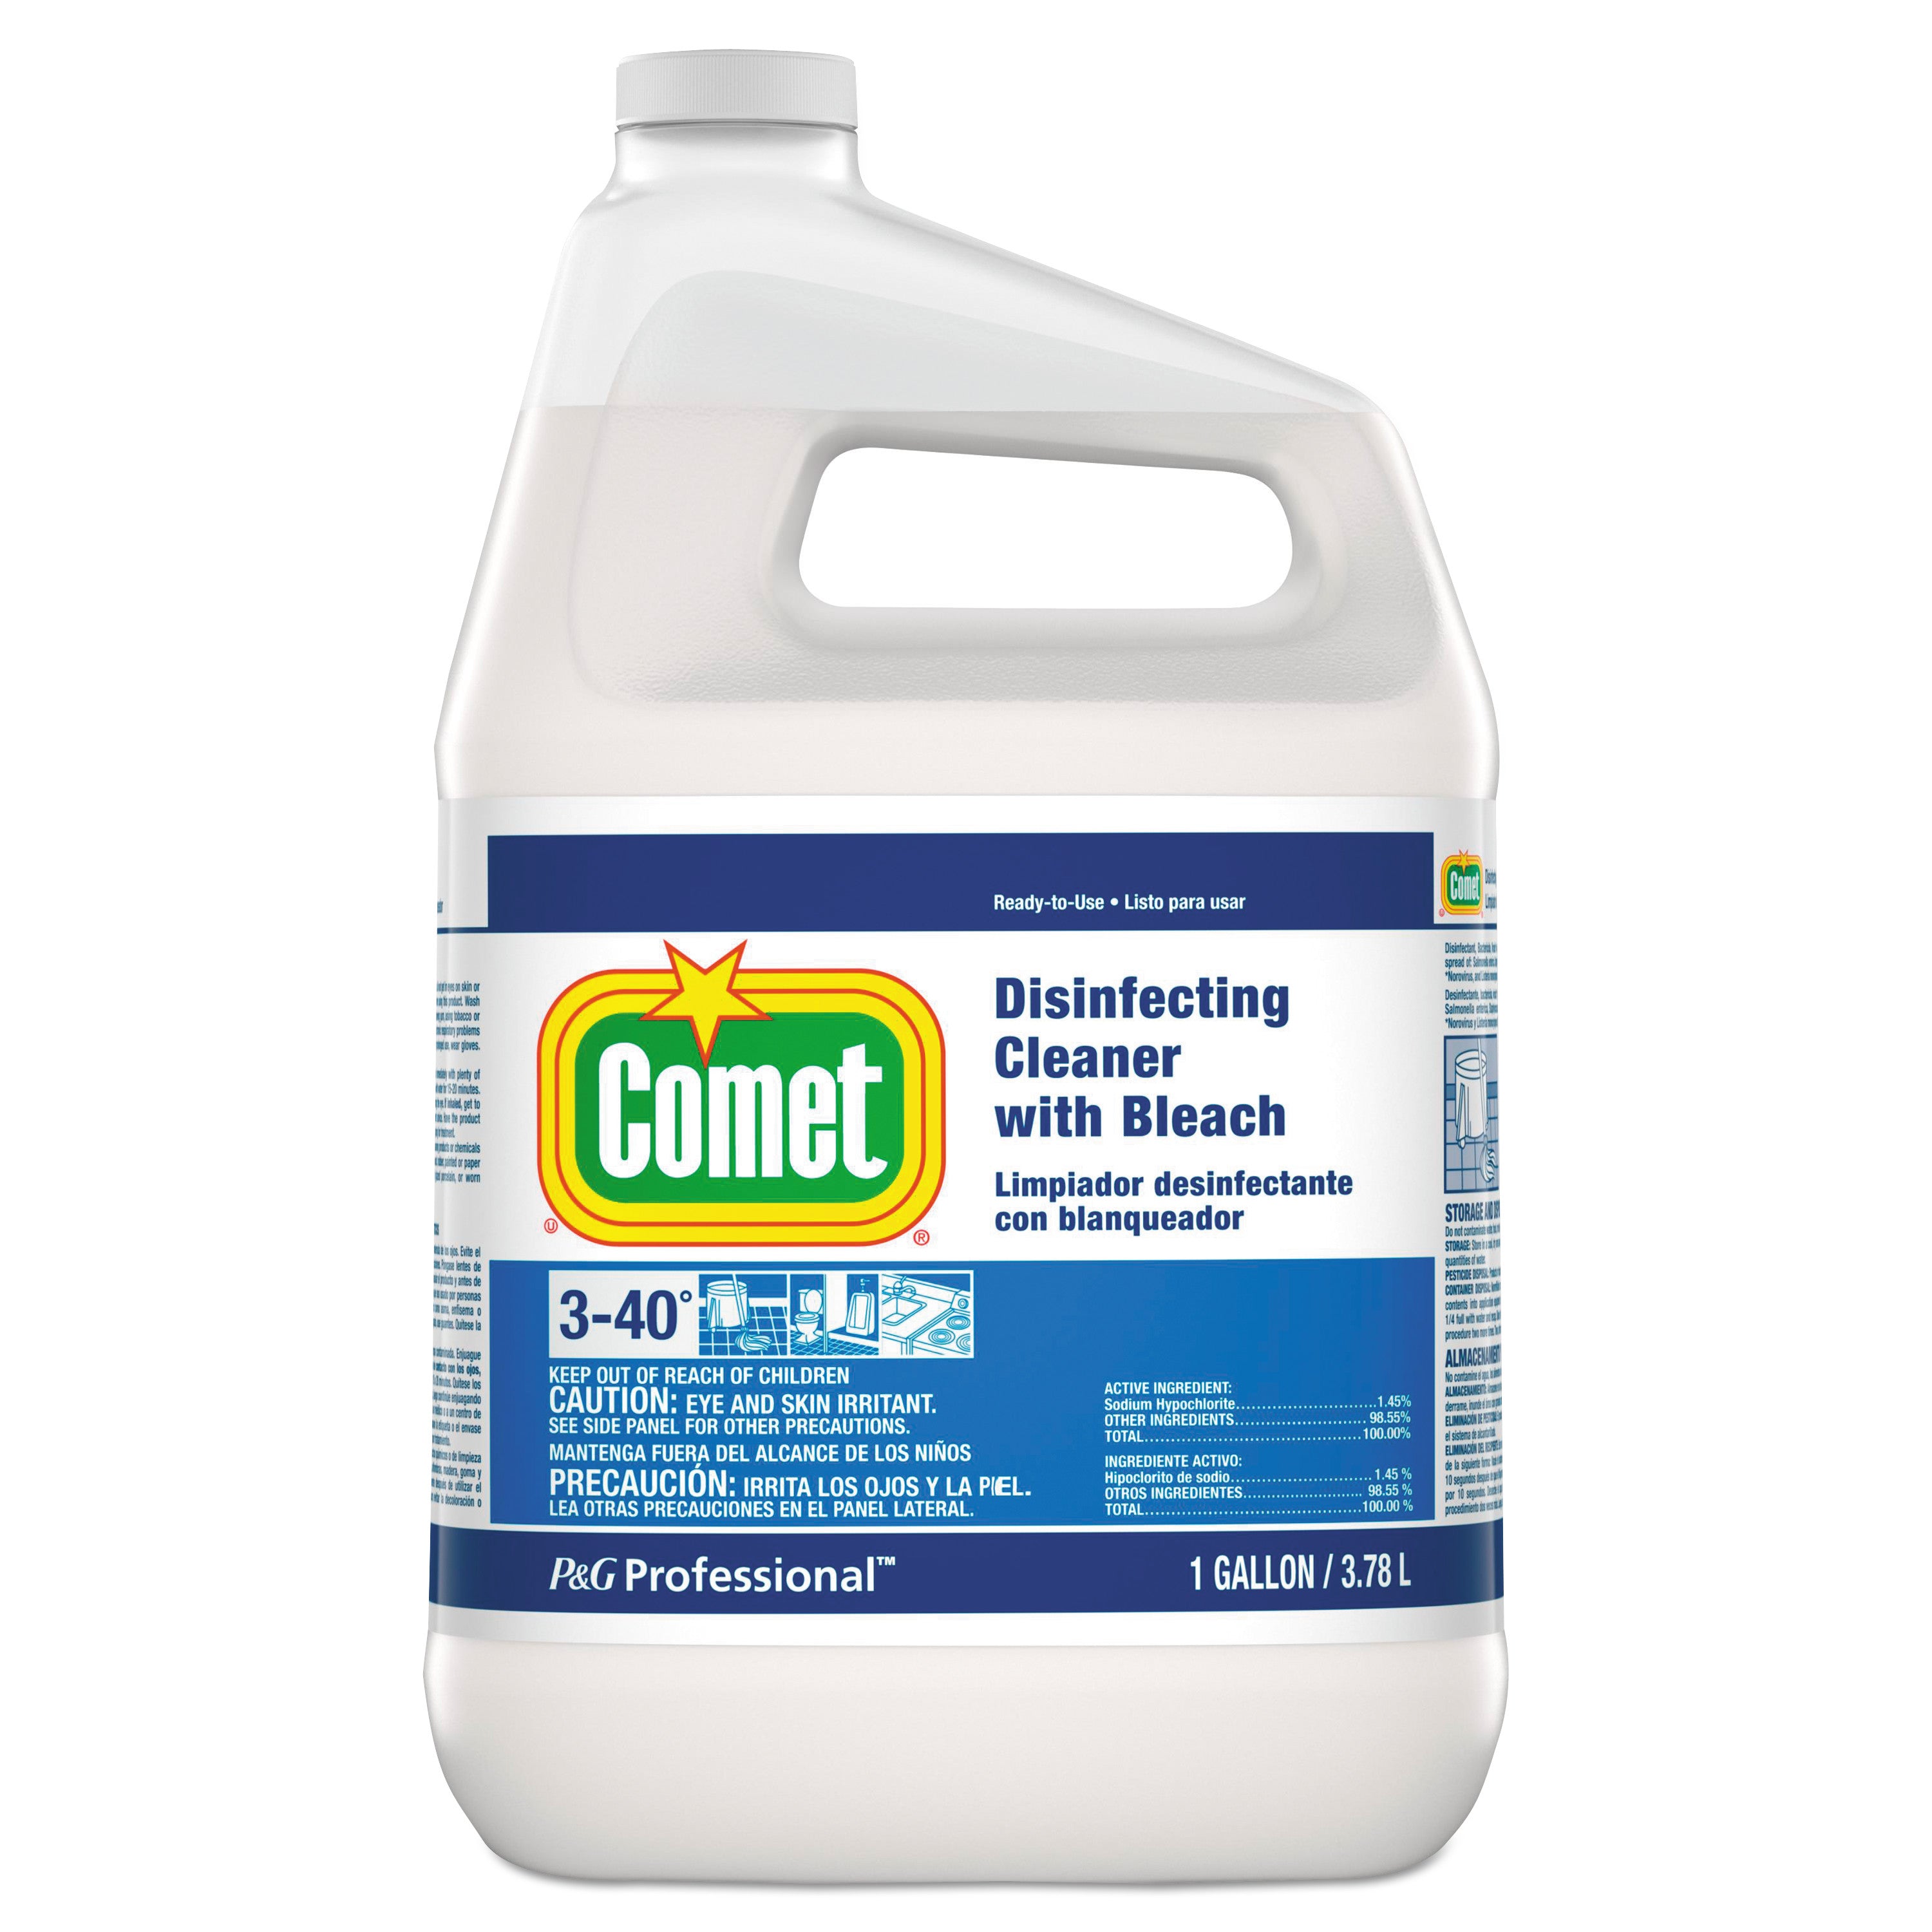 Disinfecting Cleaner with Bleach, 1 gal Bottle - 